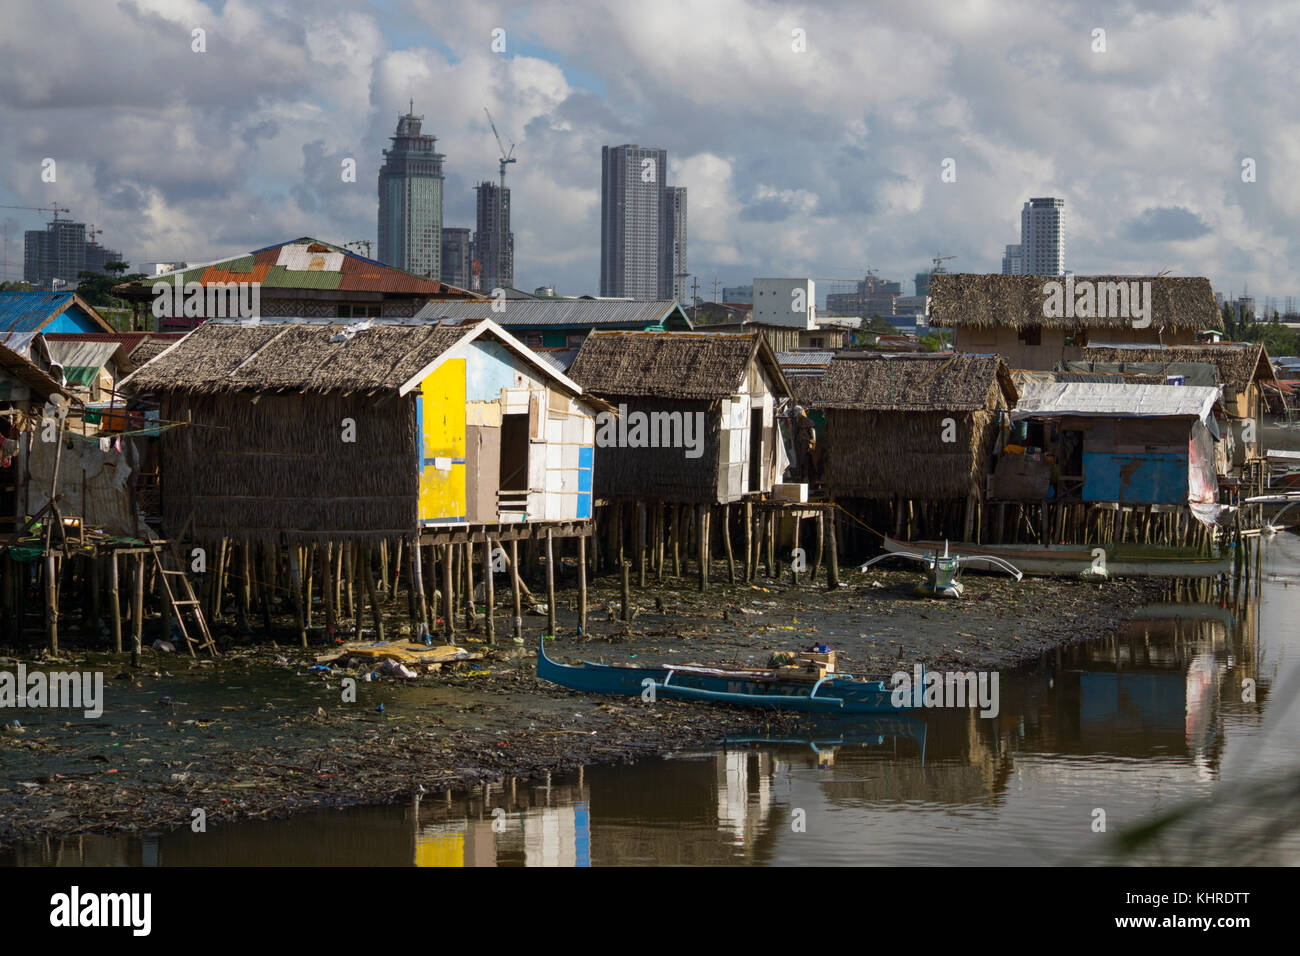 Buildings made of light materials on wooden stilts are home to the Badjao community on the outskirts of Cebu City,Philippines.Modern buildings within  Stock Photo